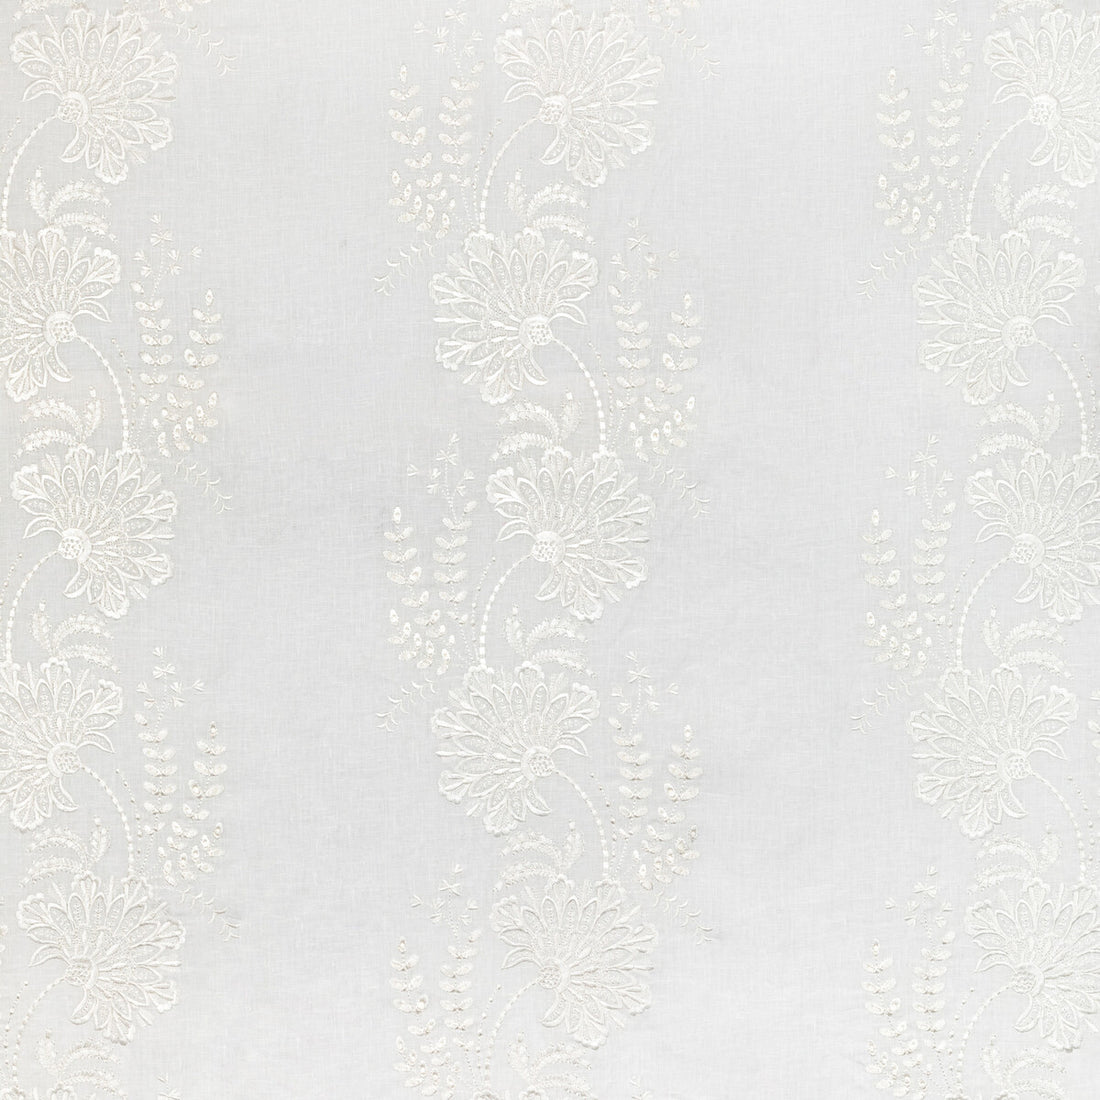 Valencia Sheer fabric in ivory color - pattern 2021122.1.0 - by Lee Jofa in the Summerland collection